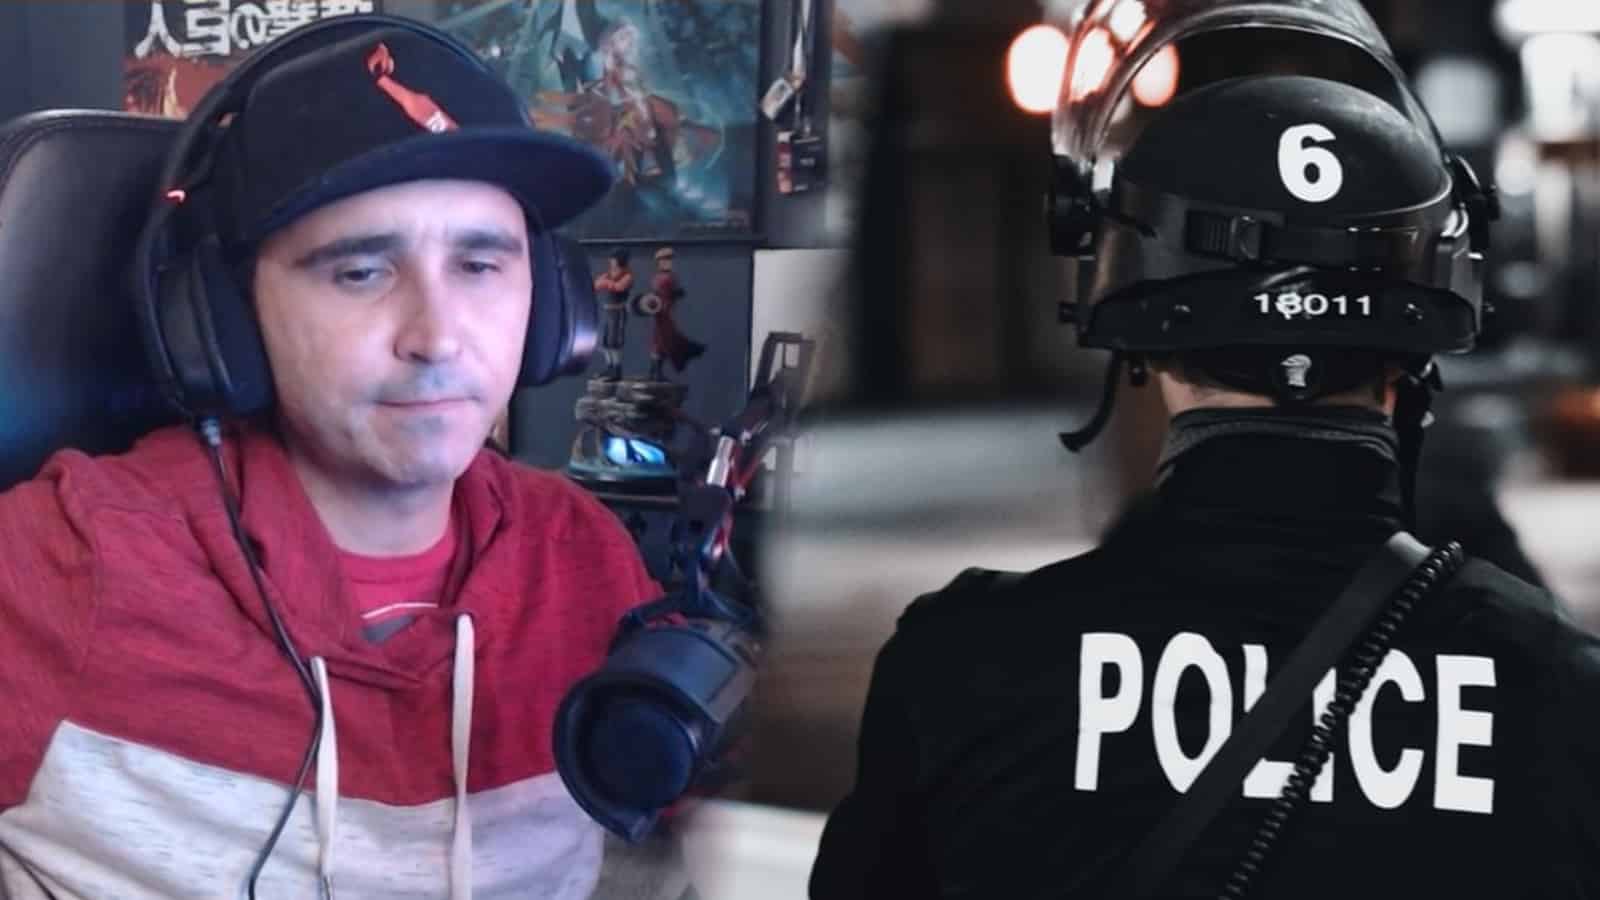 Summit1g Most Swatted Streamer